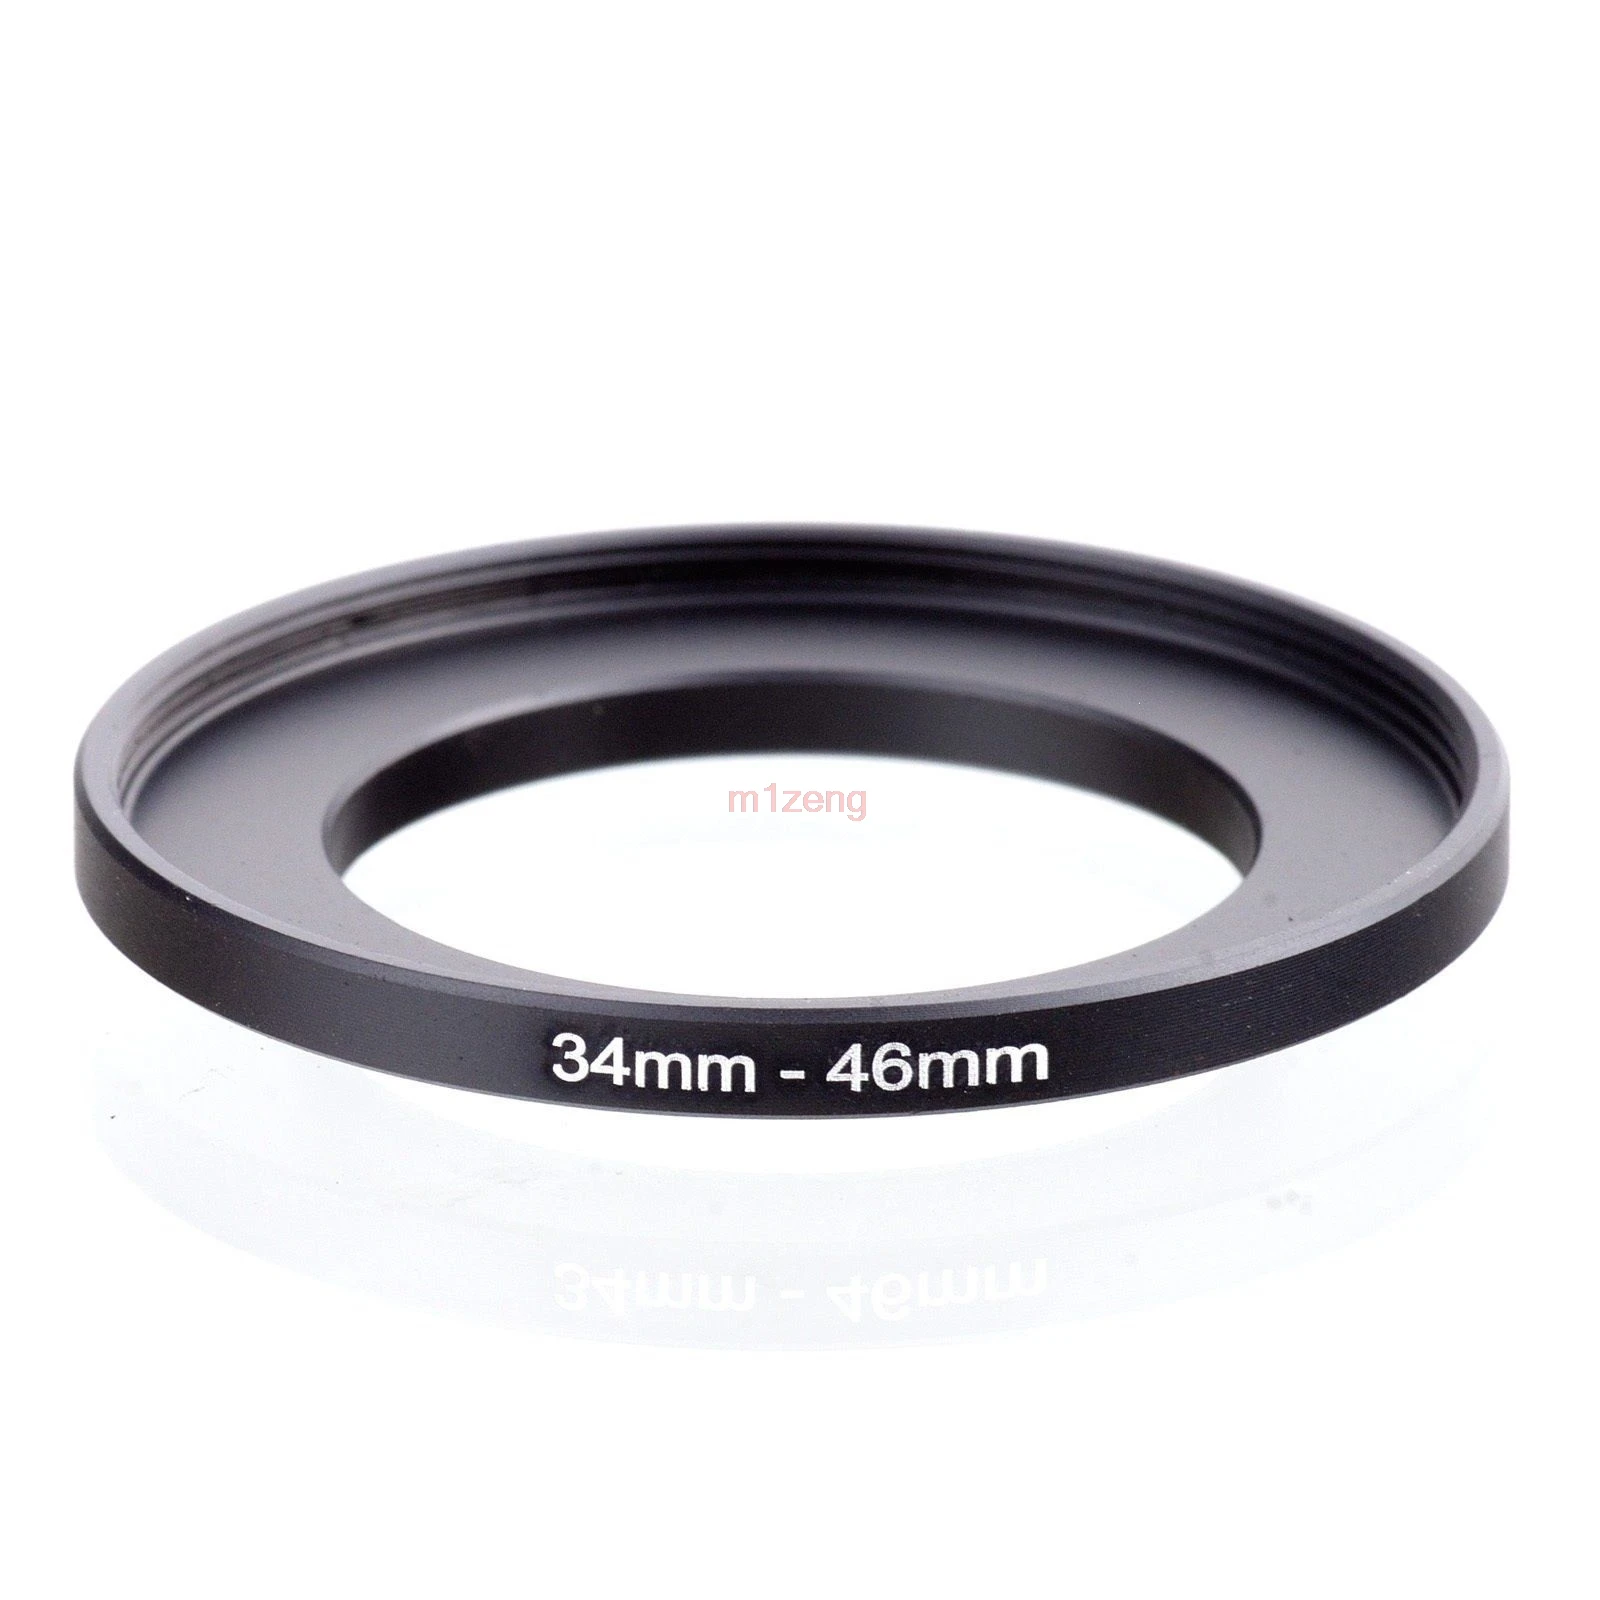 

34mm-46mm 34-46 mm 34 to 46 Step Up Filter Ring Adapter for canon nikon pentax olympus camera